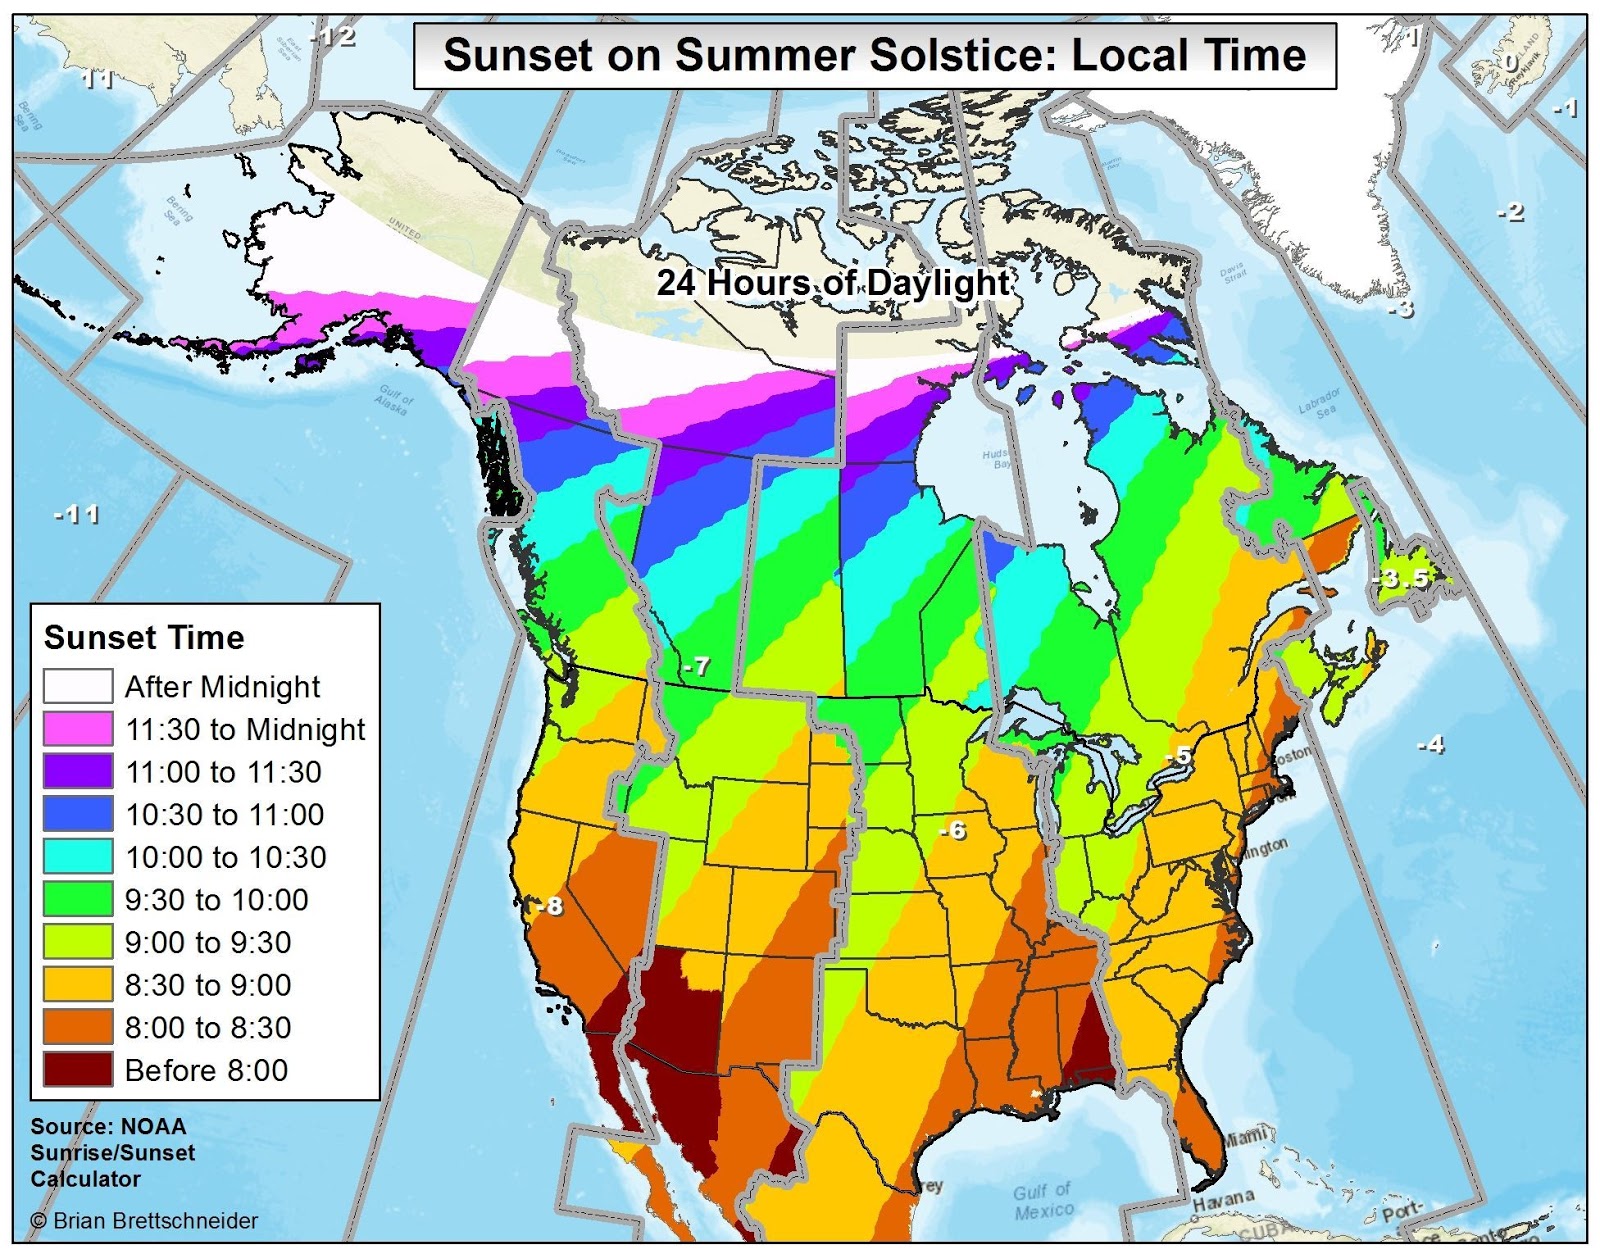 Sunrise time, sunset time, and hours of daylight on the summer solstice